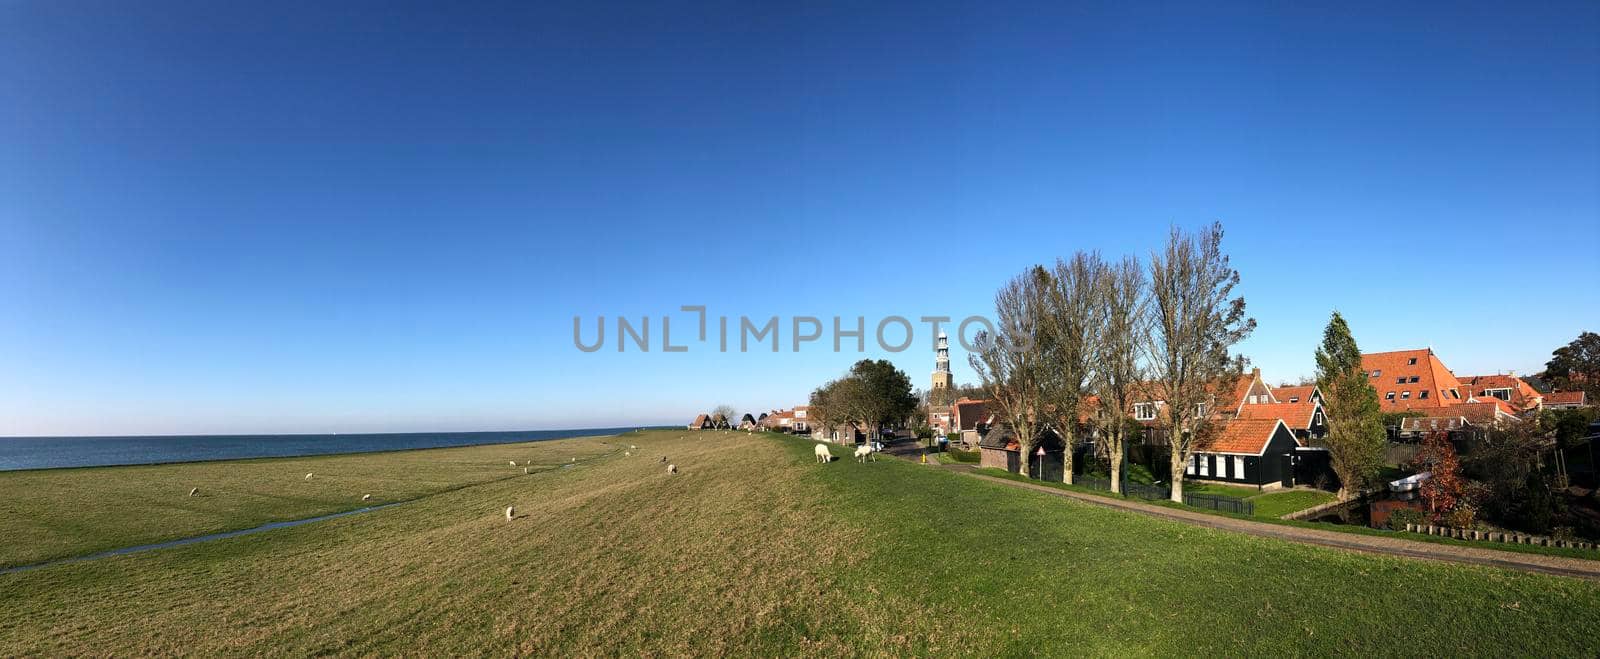 Panorama from the dyke around Hindeloopen  by traveltelly